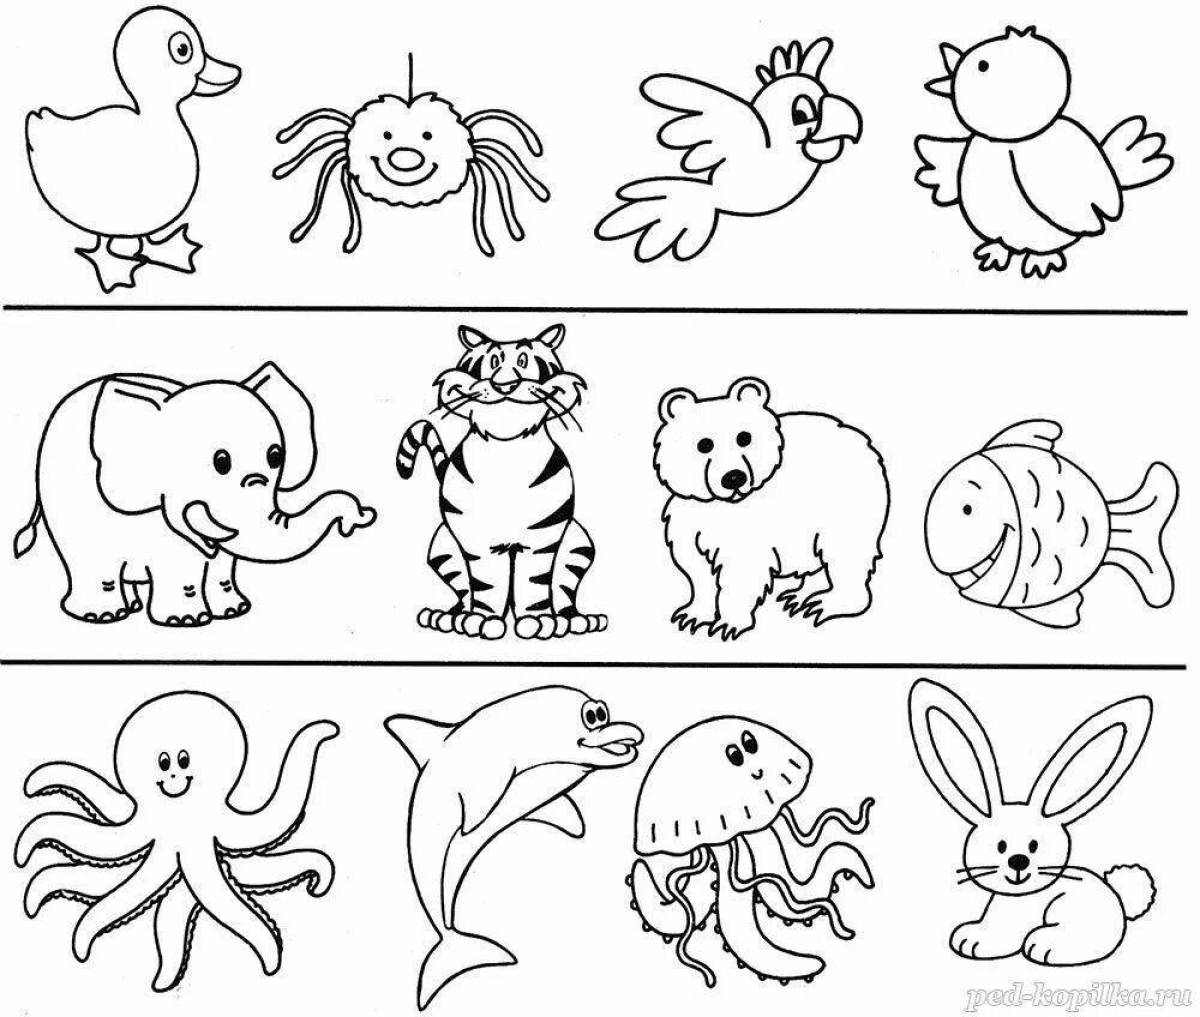 Entertaining coloring educational games for children 5 years old